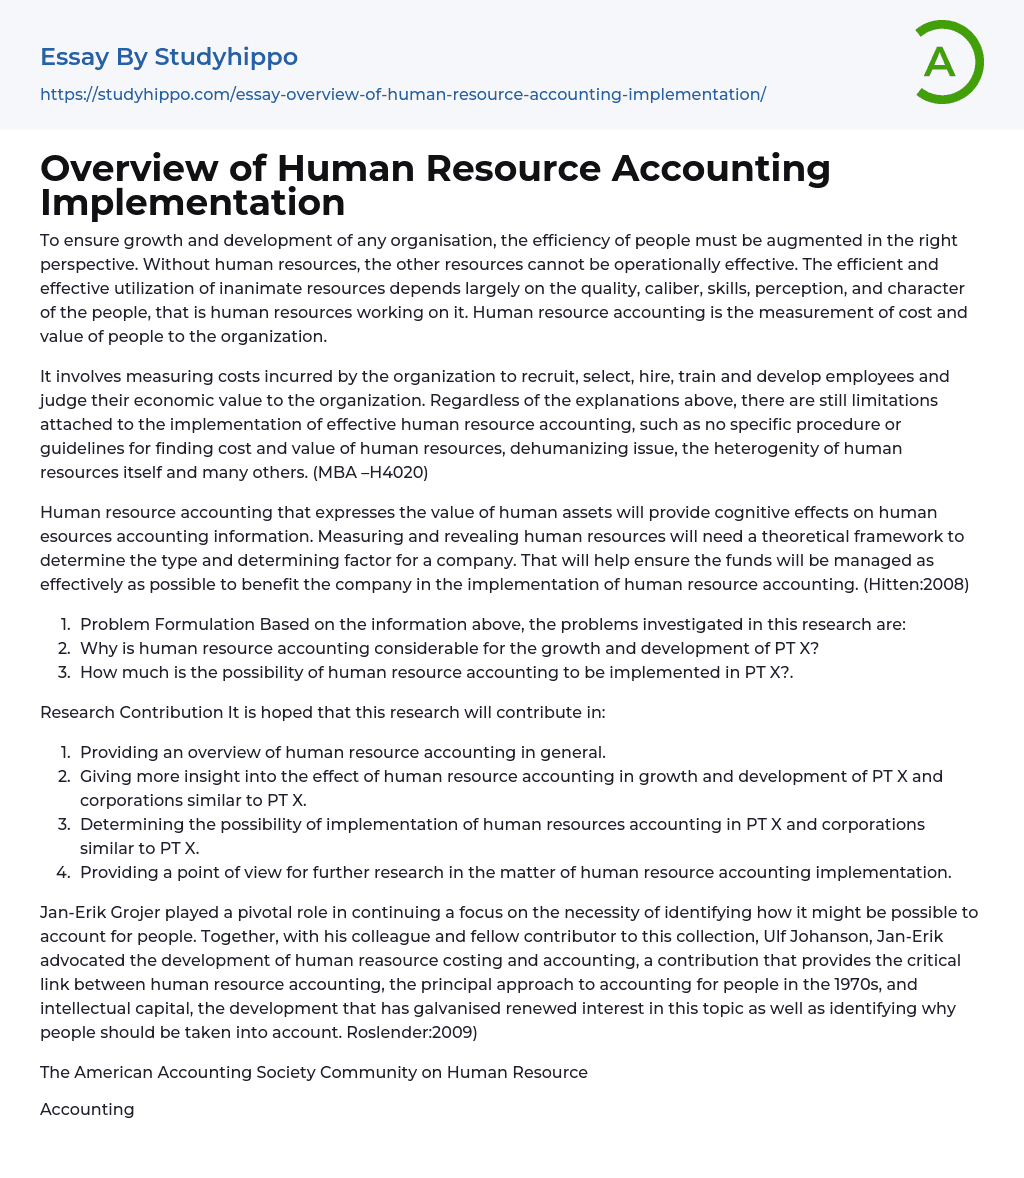 Overview of Human Resource Accounting Implementation Essay Example